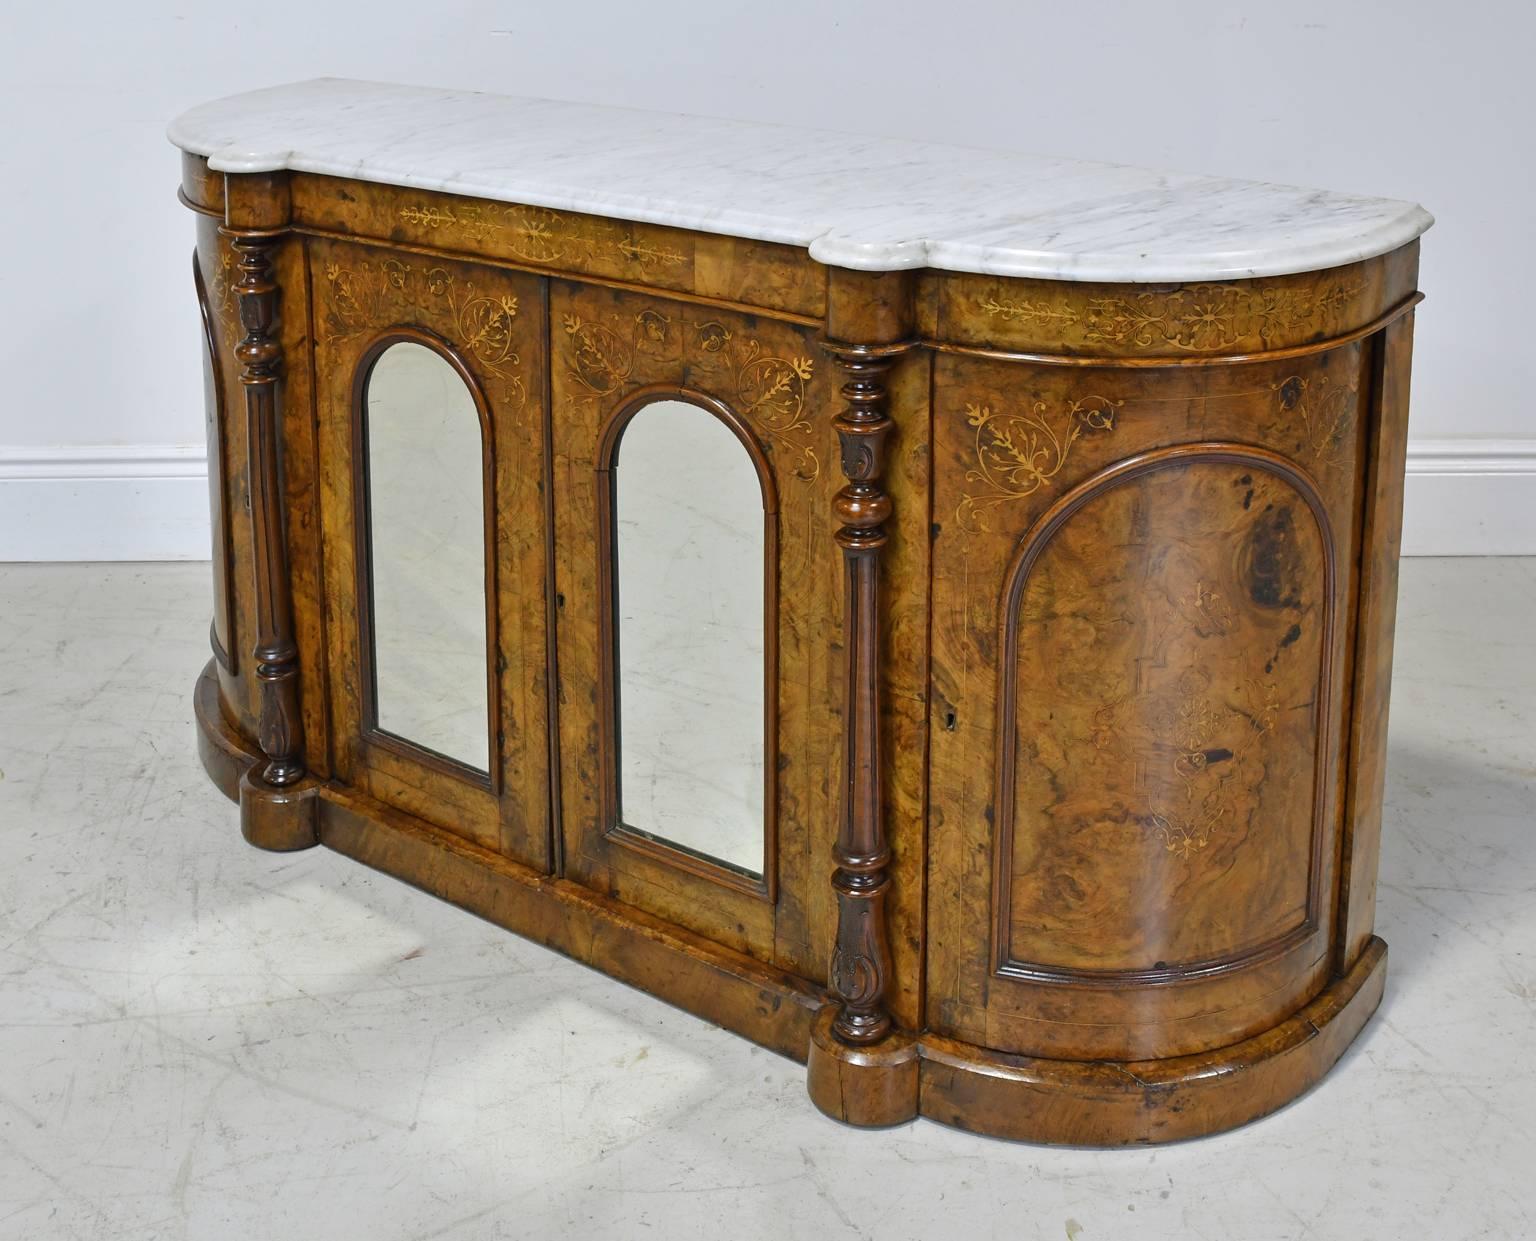 An early English Victorian console or sideboard in "D" form in burled walnut with marquetry inlays in satinwood, and white Carrara marble top. Features two centre cabinet doors with arched mirrors in panels, which are flanked by turned